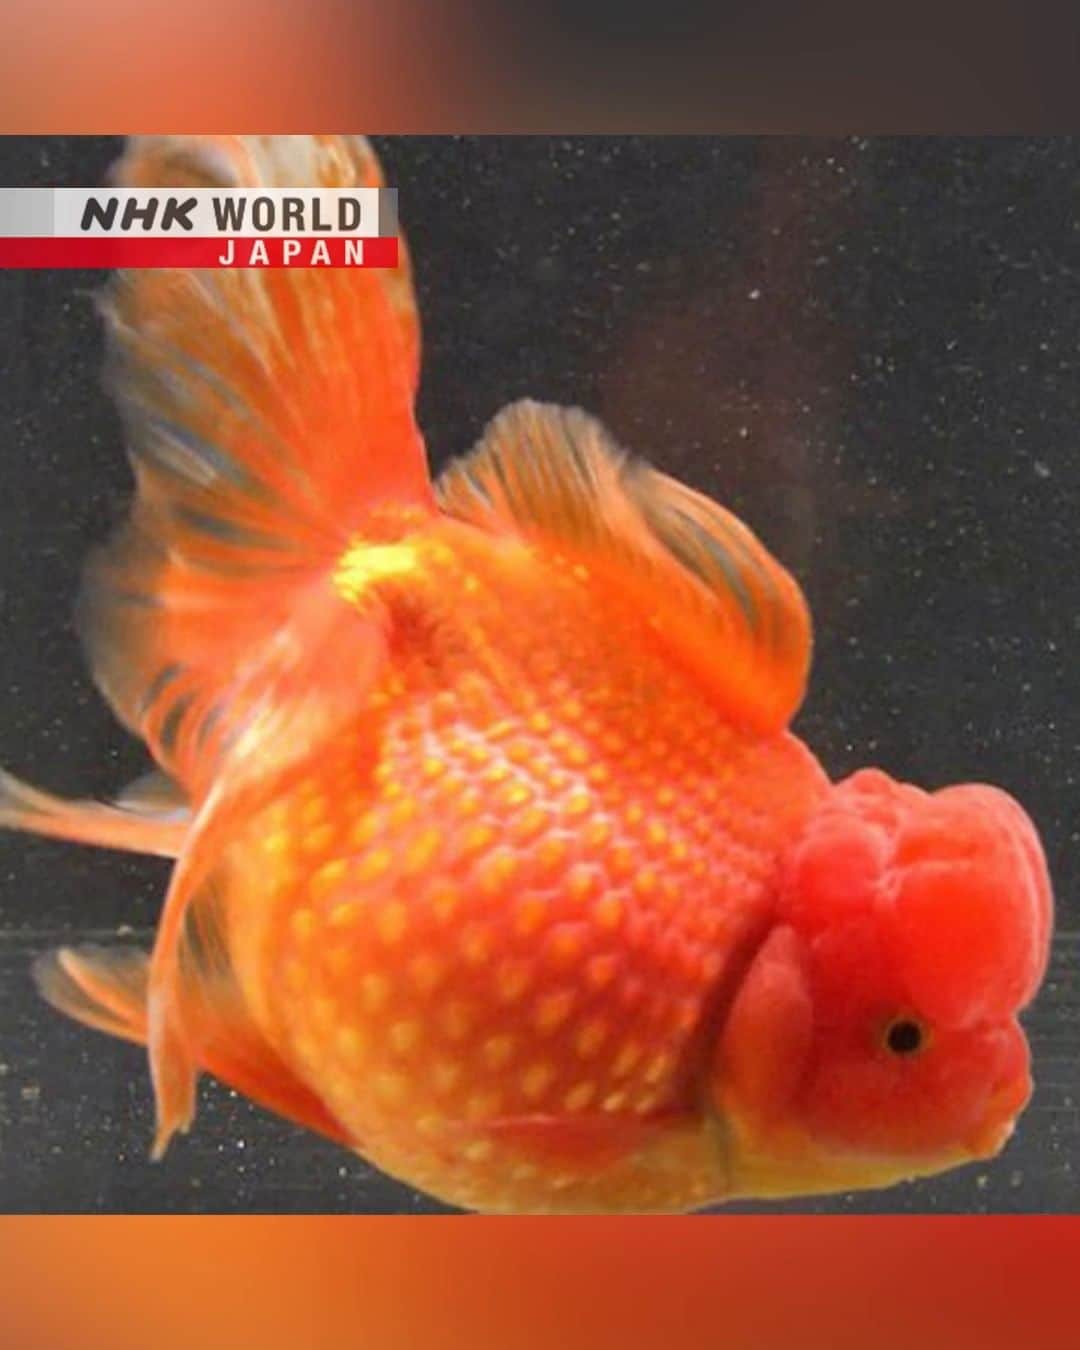 NHK「WORLD-JAPAN」のインスタグラム：「Watching goldfish swim is said to offer a cooling effect during Japan’s hot and humid summer months.🌬️🫠  The popular fish are also considered to be auspicious and able to ward off misfortune. This is due to their red coloring which is the same as that often used on the gates at Japanese shrines.⛩️ . 👉Japanology celebrates 20 years of showcasing Japanese culture! What were your favorite episodes? Share your comments for a chance to be featured in our Japanology 20th Anniversary Special in March! . 👉Discover more about Japan｜Watch｜Japanology｜Free On Demand｜NHK WORLD-JAPAN website.👀 . 👉Tap in Stories/Highlights to get there.👆 . 👉See the link in our bio for more on the latest from Japan. . 👉If we’re on your Favorites list you won’t miss a post. . . #goldfish #金魚 #japanesegoldfish #goldfishscooping #goldfishlover #wakin #ryukin #ryukingoldfish #hamanishiki #suihogan #ranchu #kingofgoldfish #sakuranishiki #edonishiki #jikin #tosakin #japanesetradition #visitjapan #discoverjapan #japanologyplus #hiddenjapan #nhkworldjapan #japan」